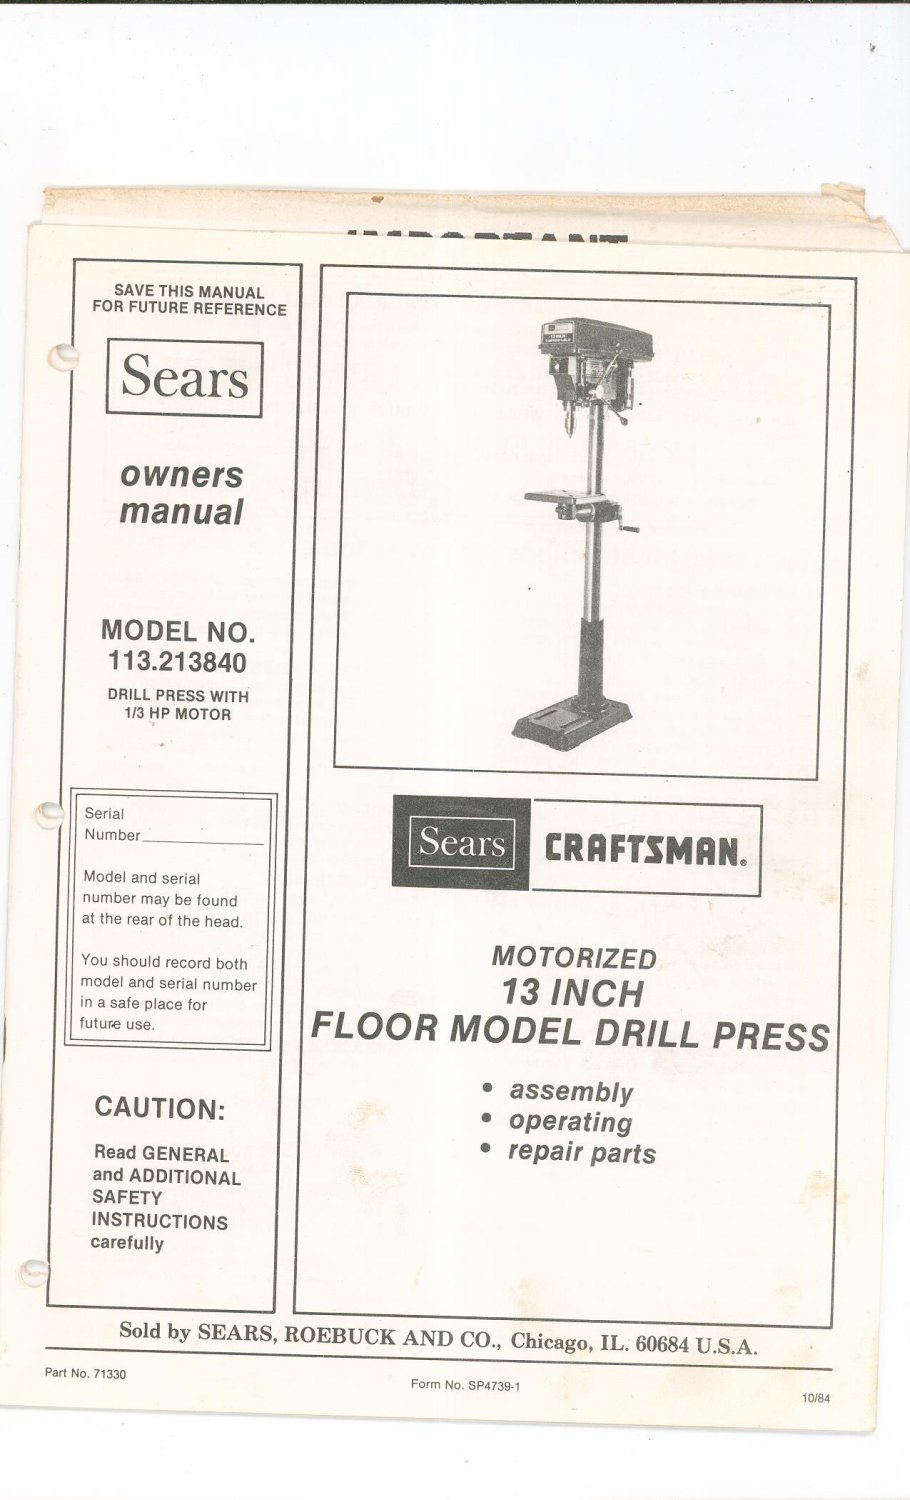 Sears Craftsman 13 Inch Floor Model Drill Press Owners Manual 113213840 Not Pdf